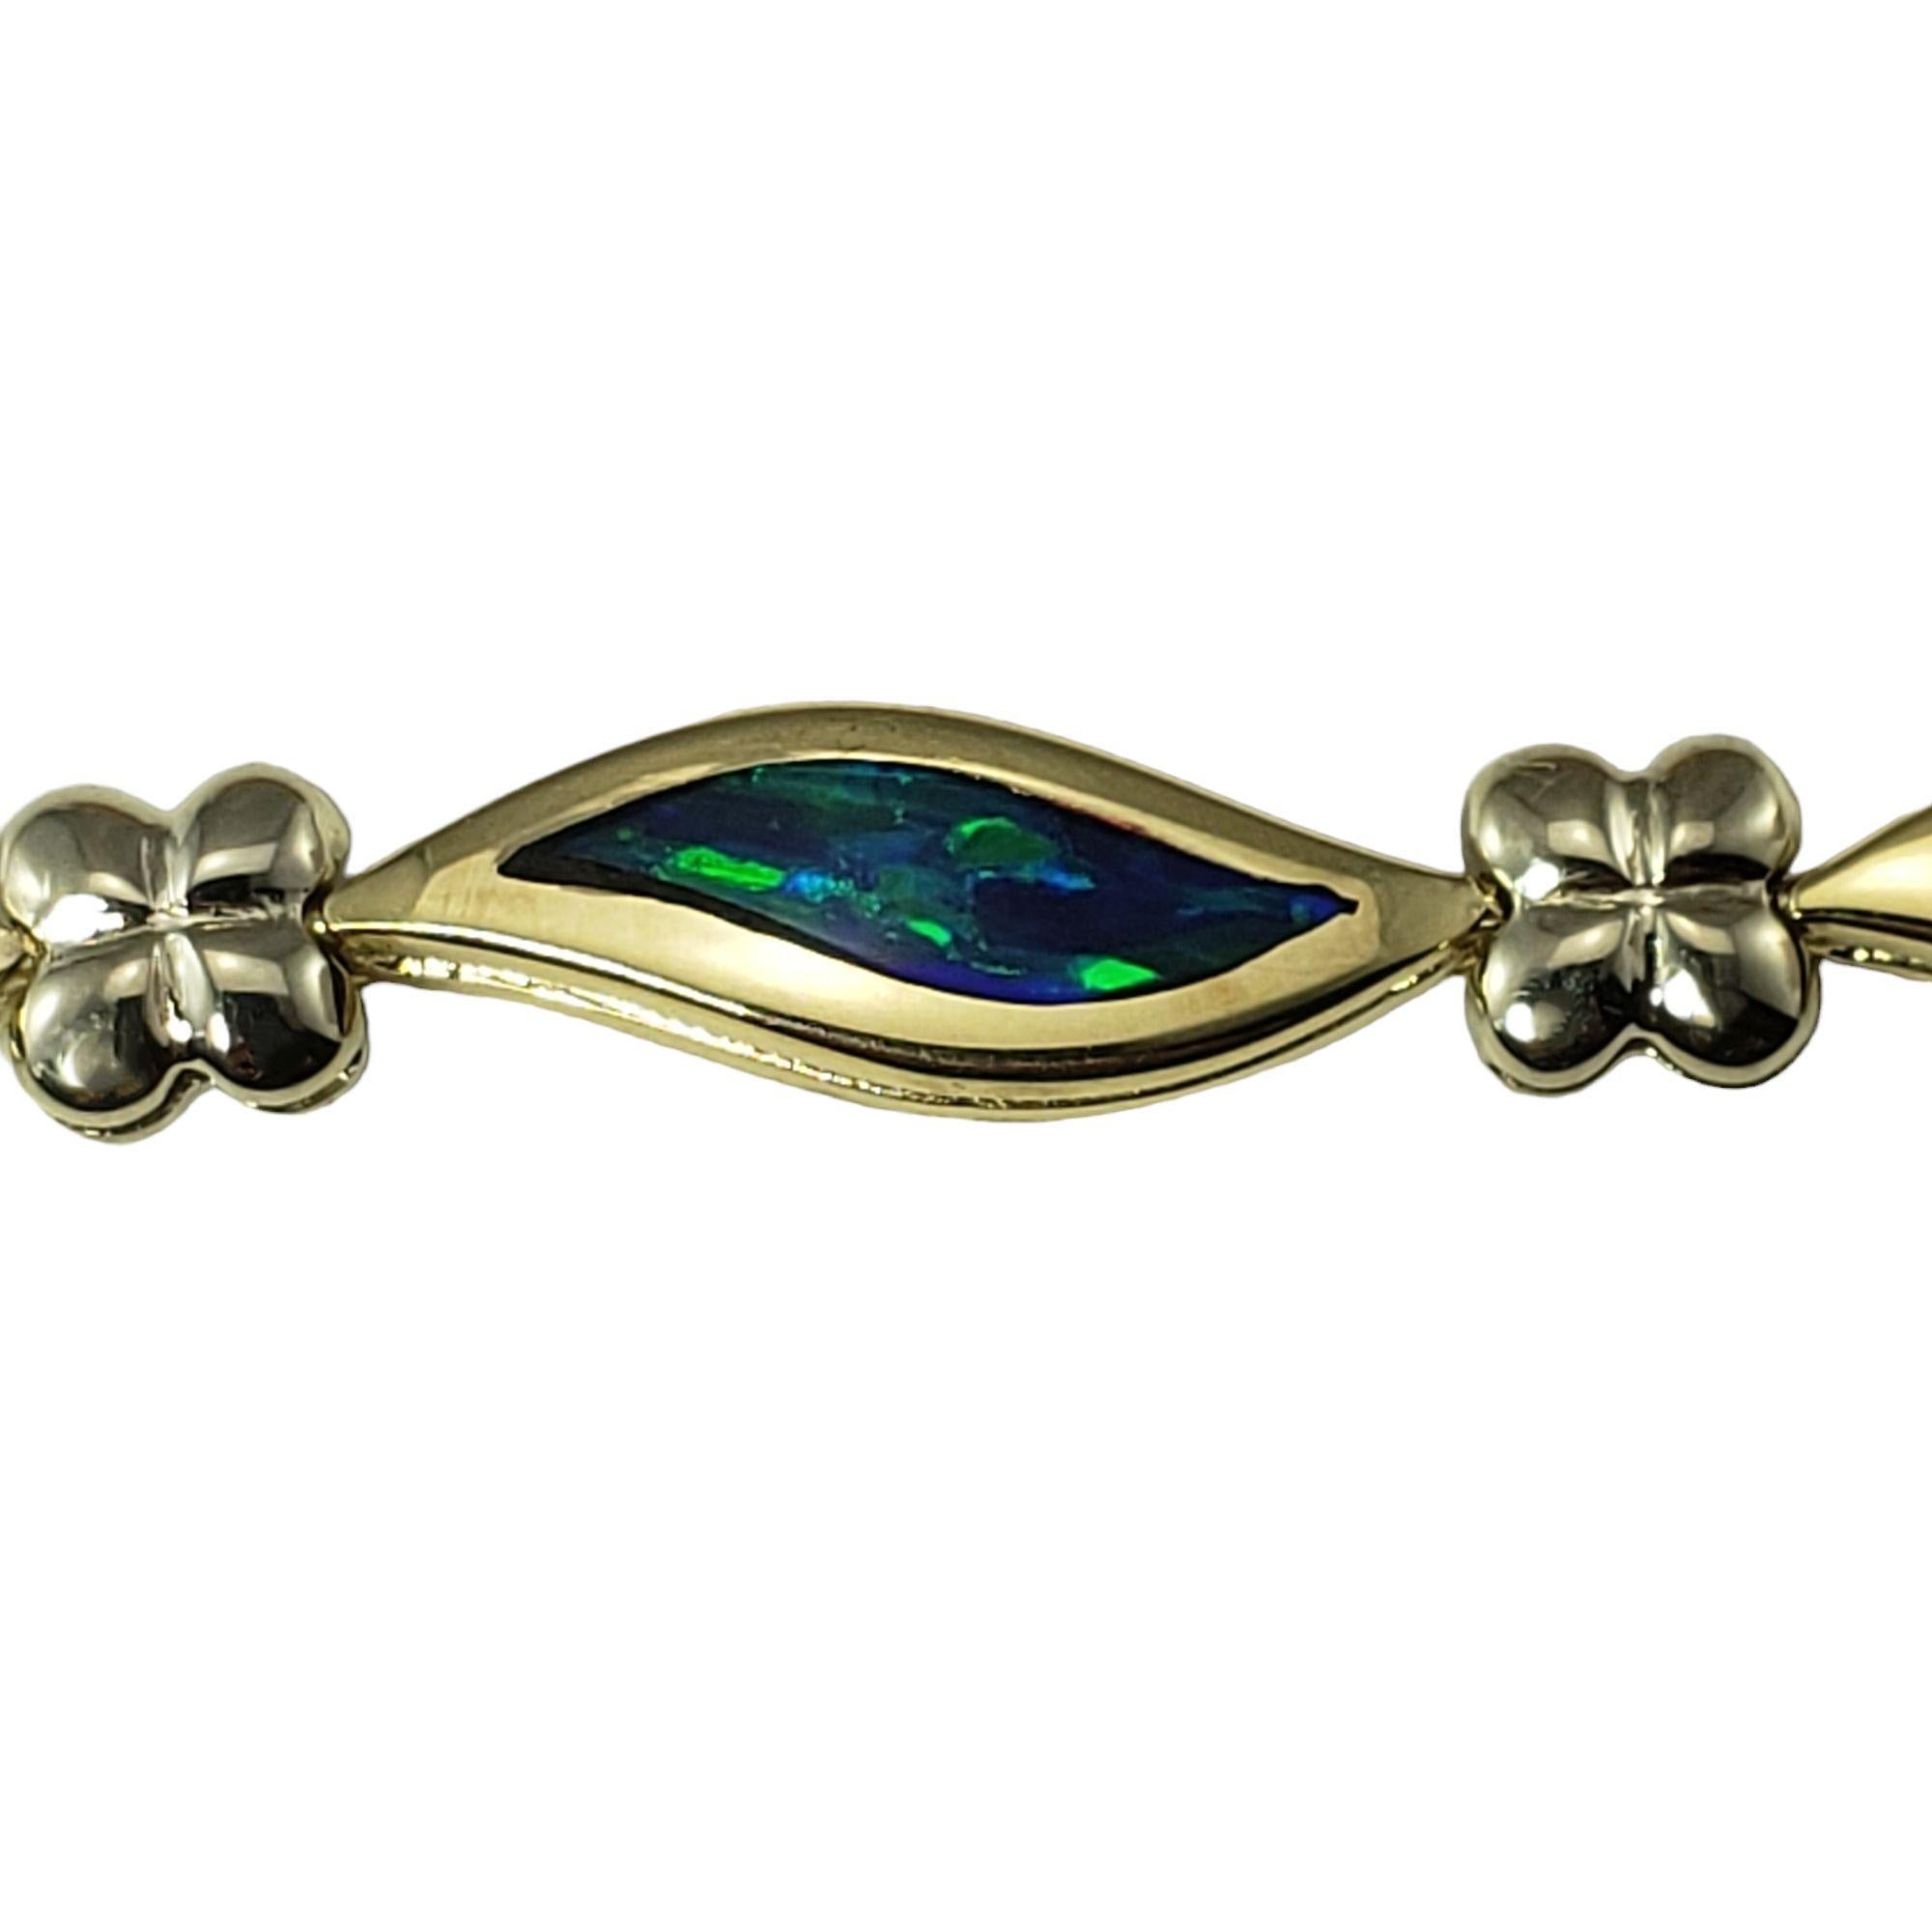  14 Karat Yellow Gold Inlaid Opal Bracelet #15088 In Good Condition For Sale In Washington Depot, CT